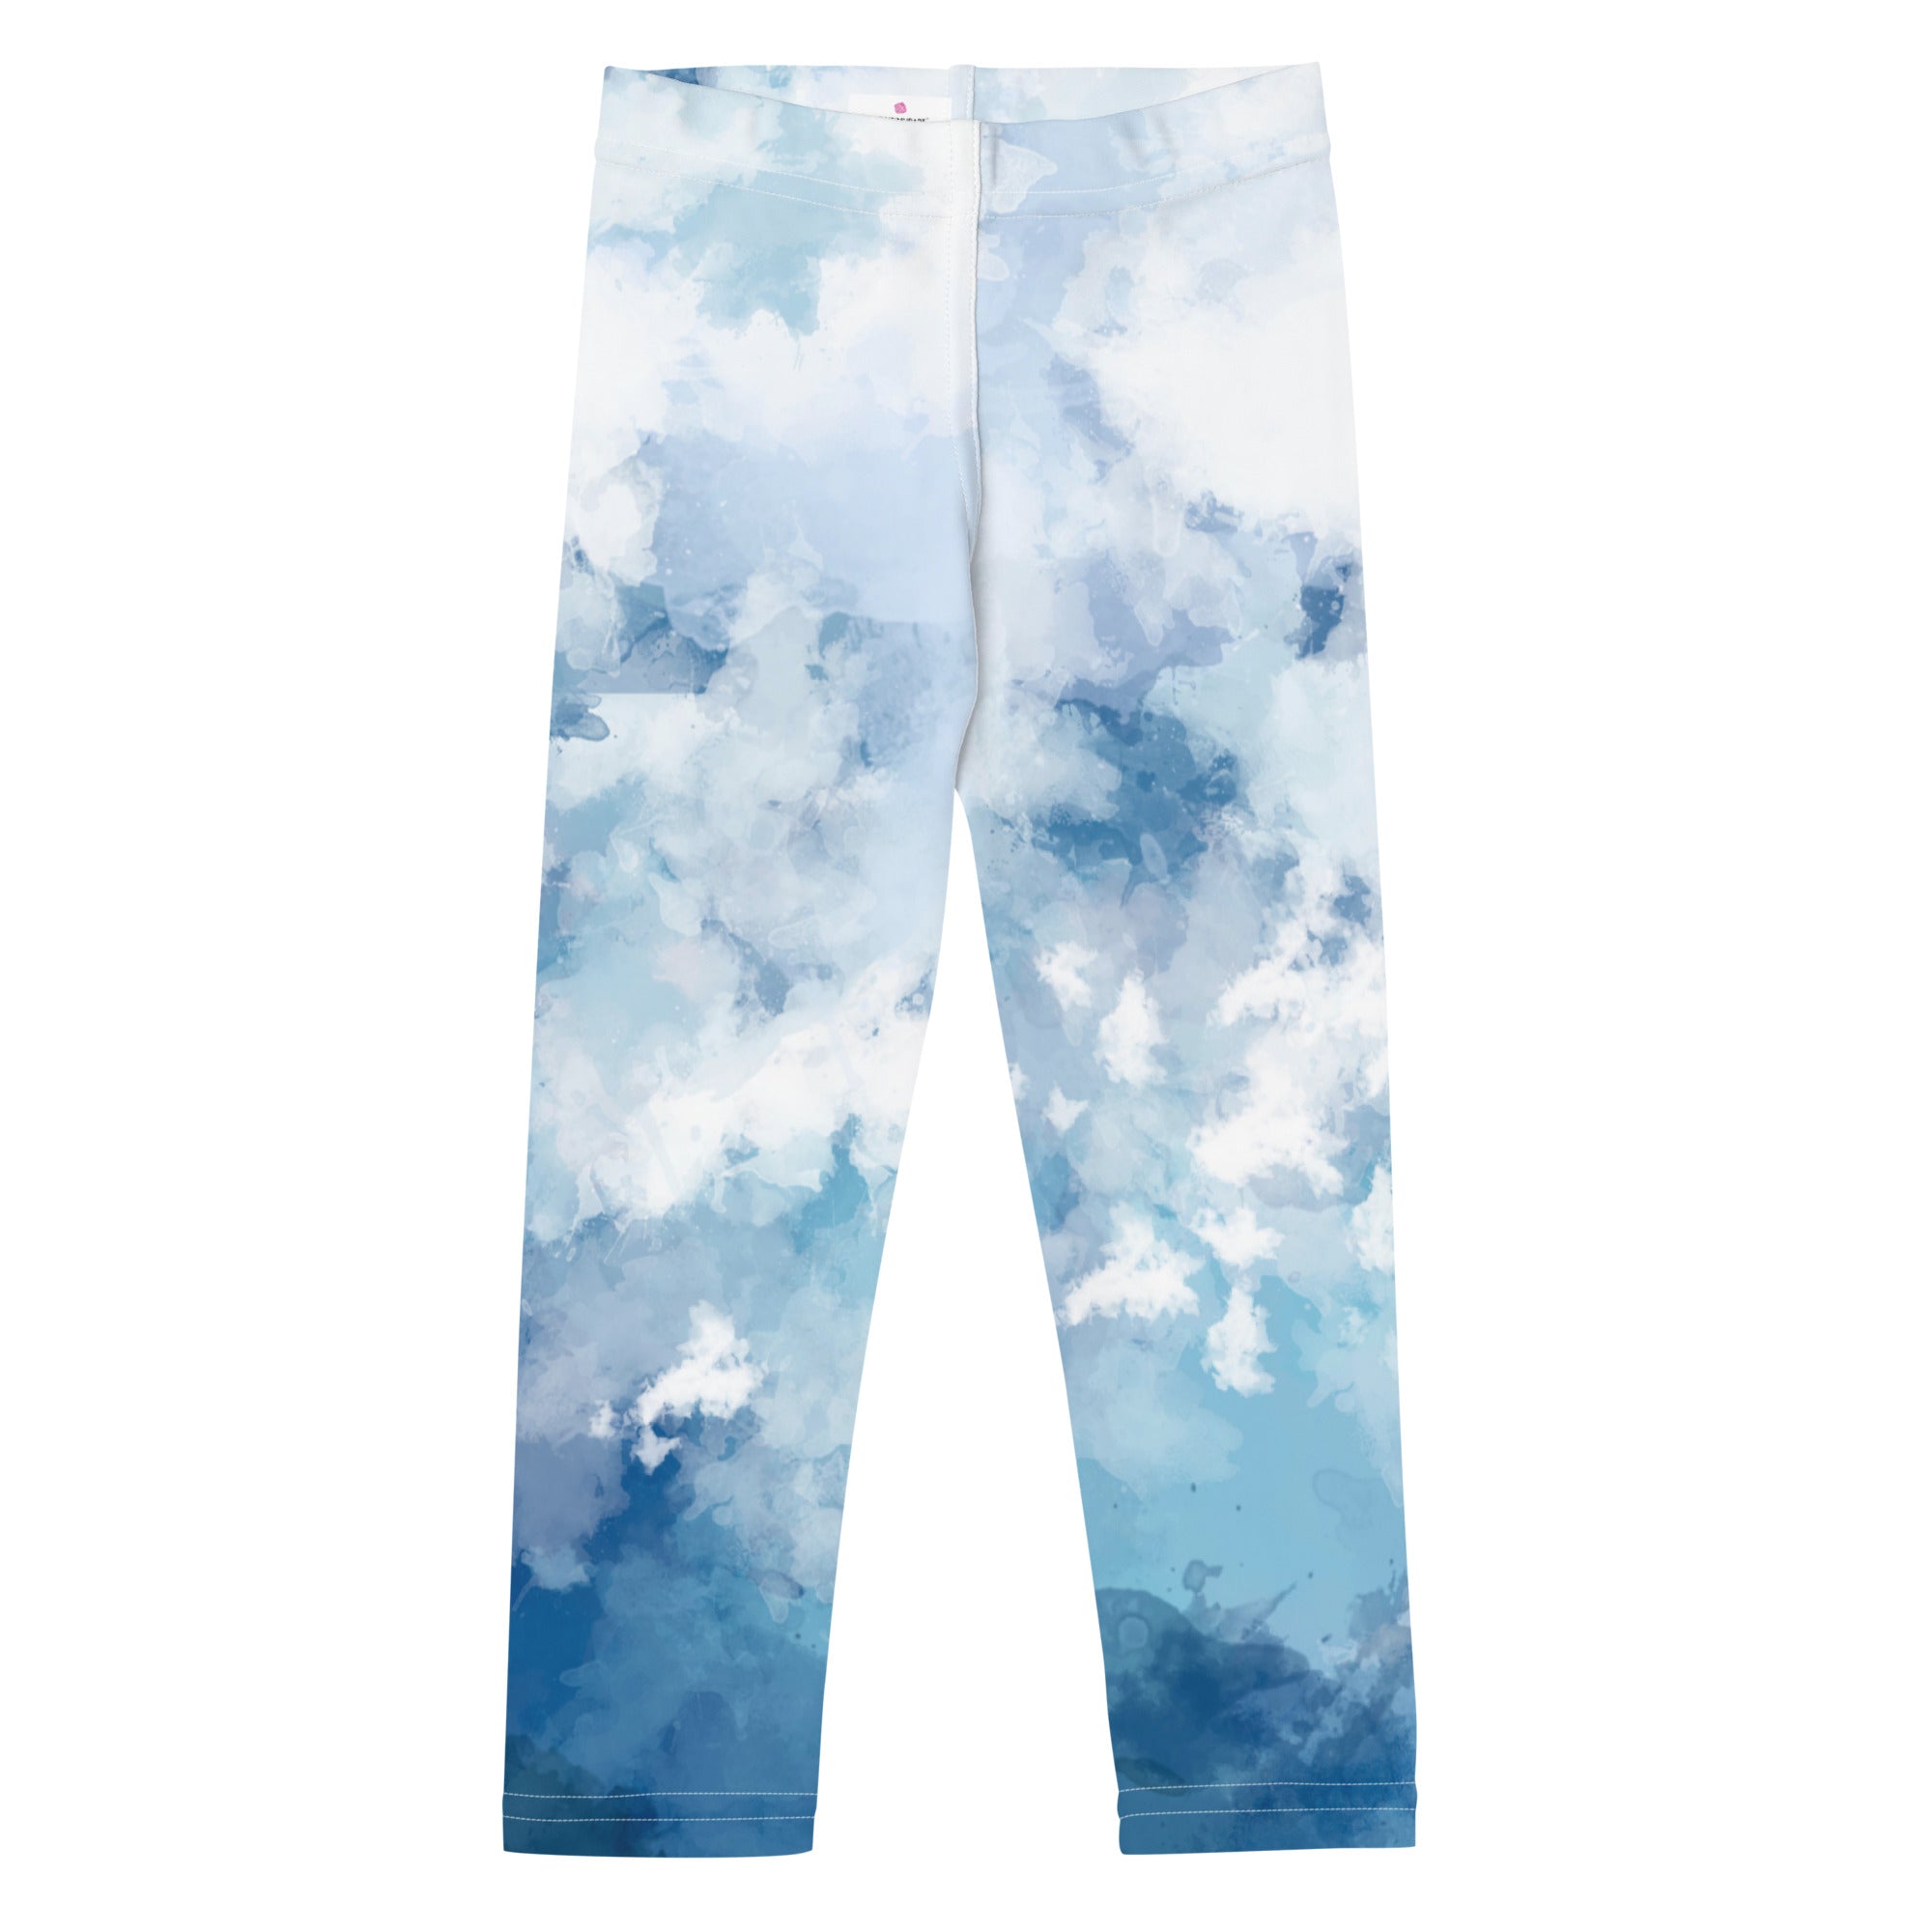 Blue Clouds Abstract Kid's Leggings, Abstract Blue Print Designer Kid's Girl's Leggings Active Wear, 38-40 UPF Fitness Workout Gym Wear Running Tights, Comfy Stretchy Pants (2T-7) Made in USA/EU/MX, Girls' Leggings & Pants, Leggings For Girls, Designer Girls Leggings Tights, Leggings For Girl Child